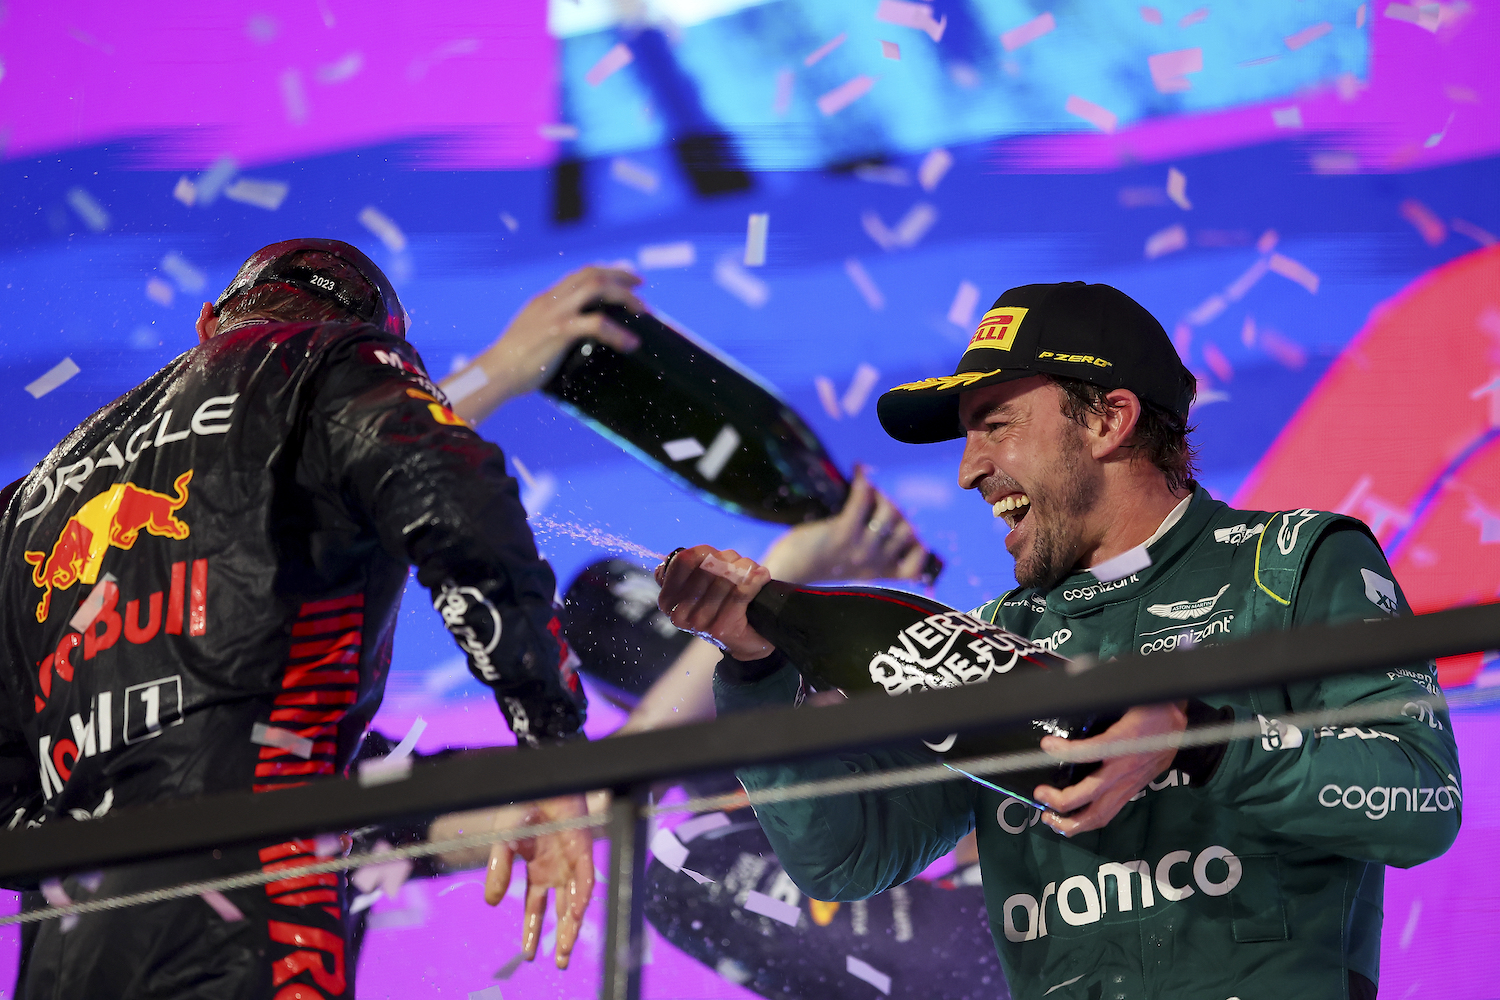 Second placed Max Verstappen of the Netherlands and Oracle Red Bull Racing and Third placed Fernando Alonso of Spain and Aston Martin F1 Team celebrate on the podium during the F1 Grand Prix of Saudi Arabia at Jeddah Corniche Circuit on March 19, 2023 in Jeddah, Saudi Arabia.